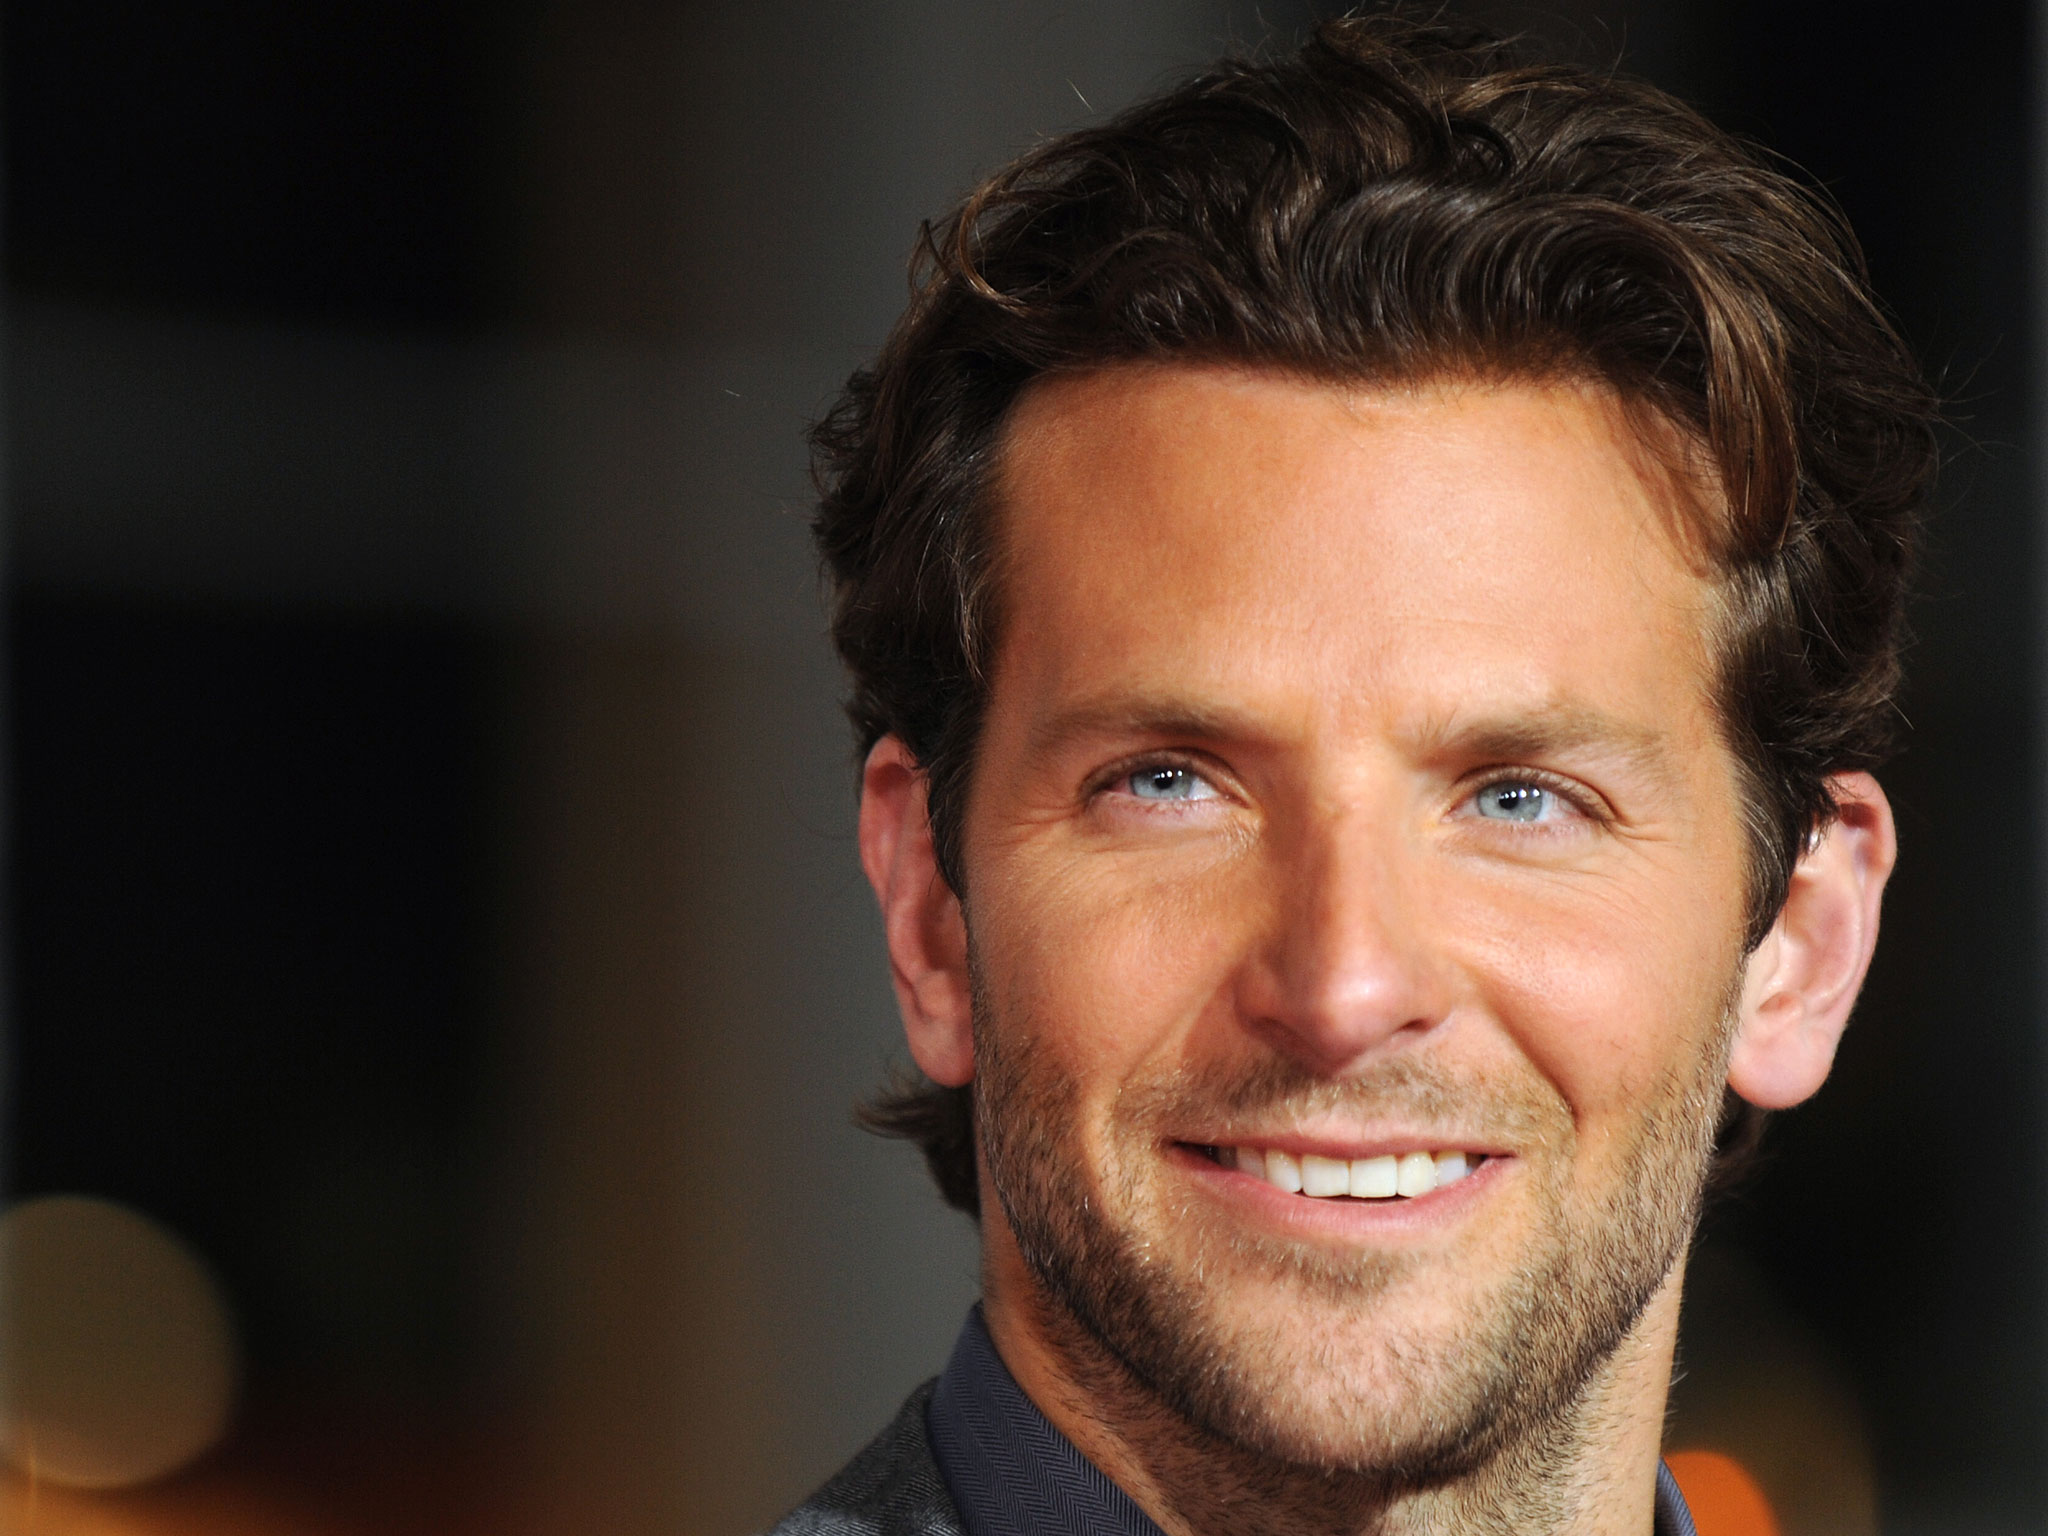 Bradley Cooper set to direct first movie with remake of A Star Is Born - News - Films - The Independent